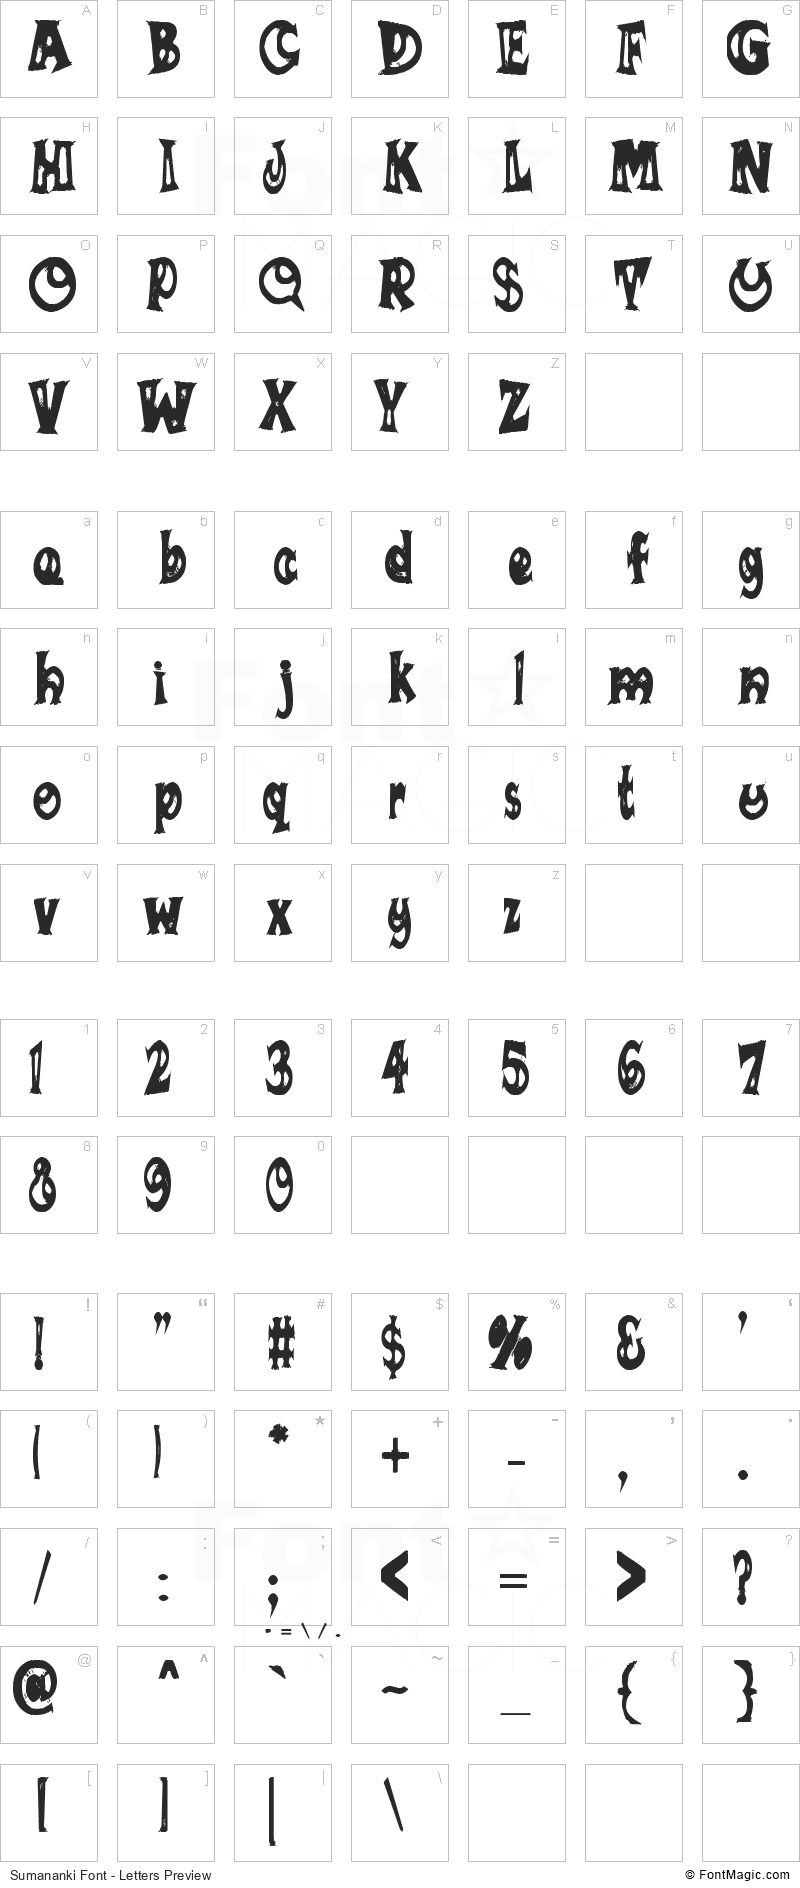 Sumananki Font - All Latters Preview Chart